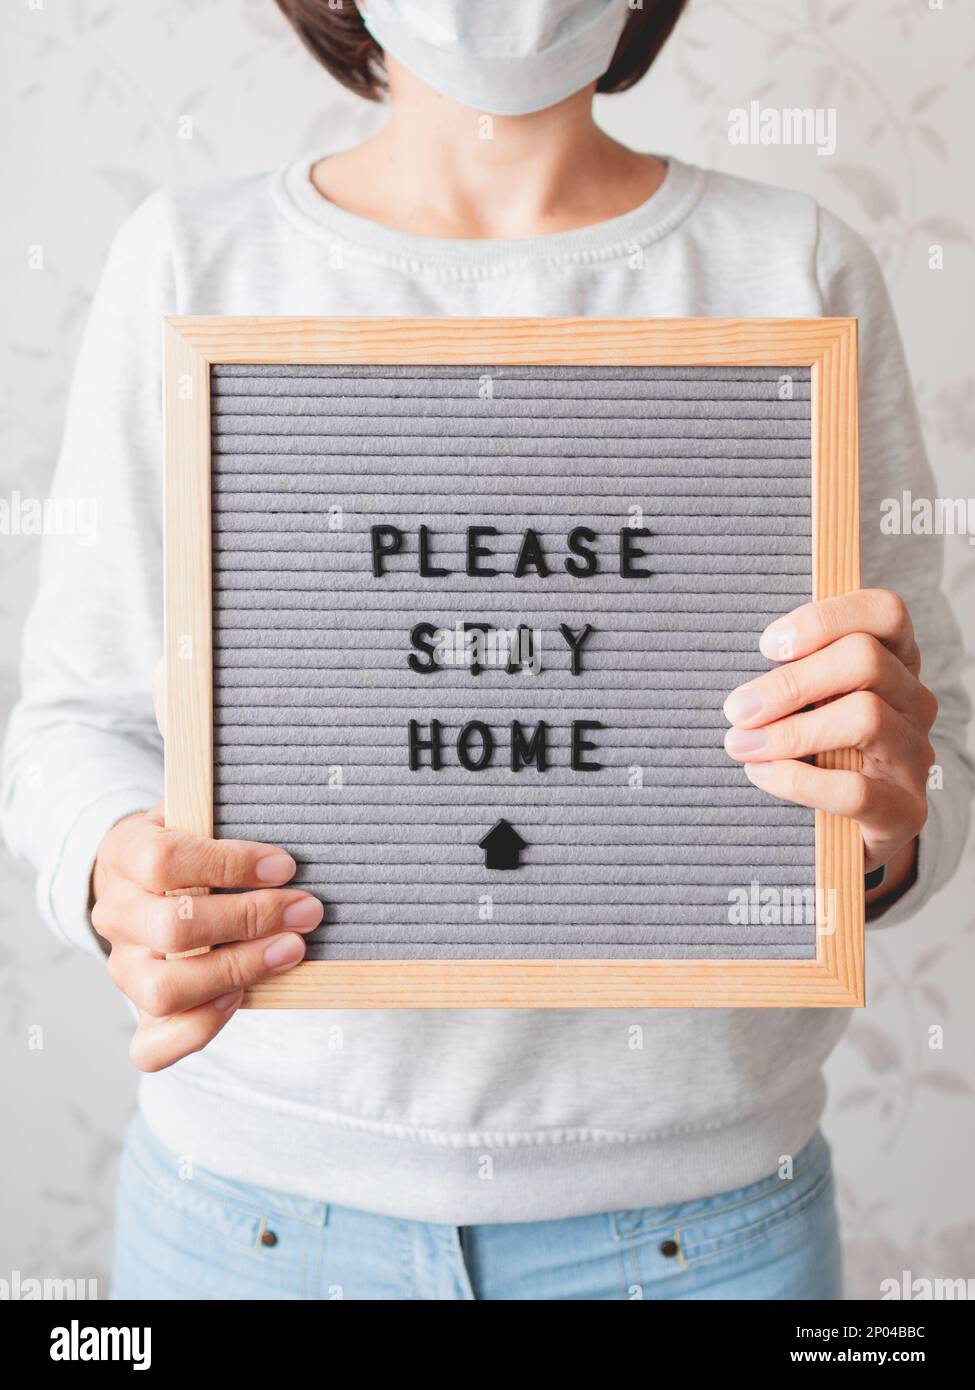 Letter Board Images – Browse 344,660 Stock Photos, Vectors, and Video